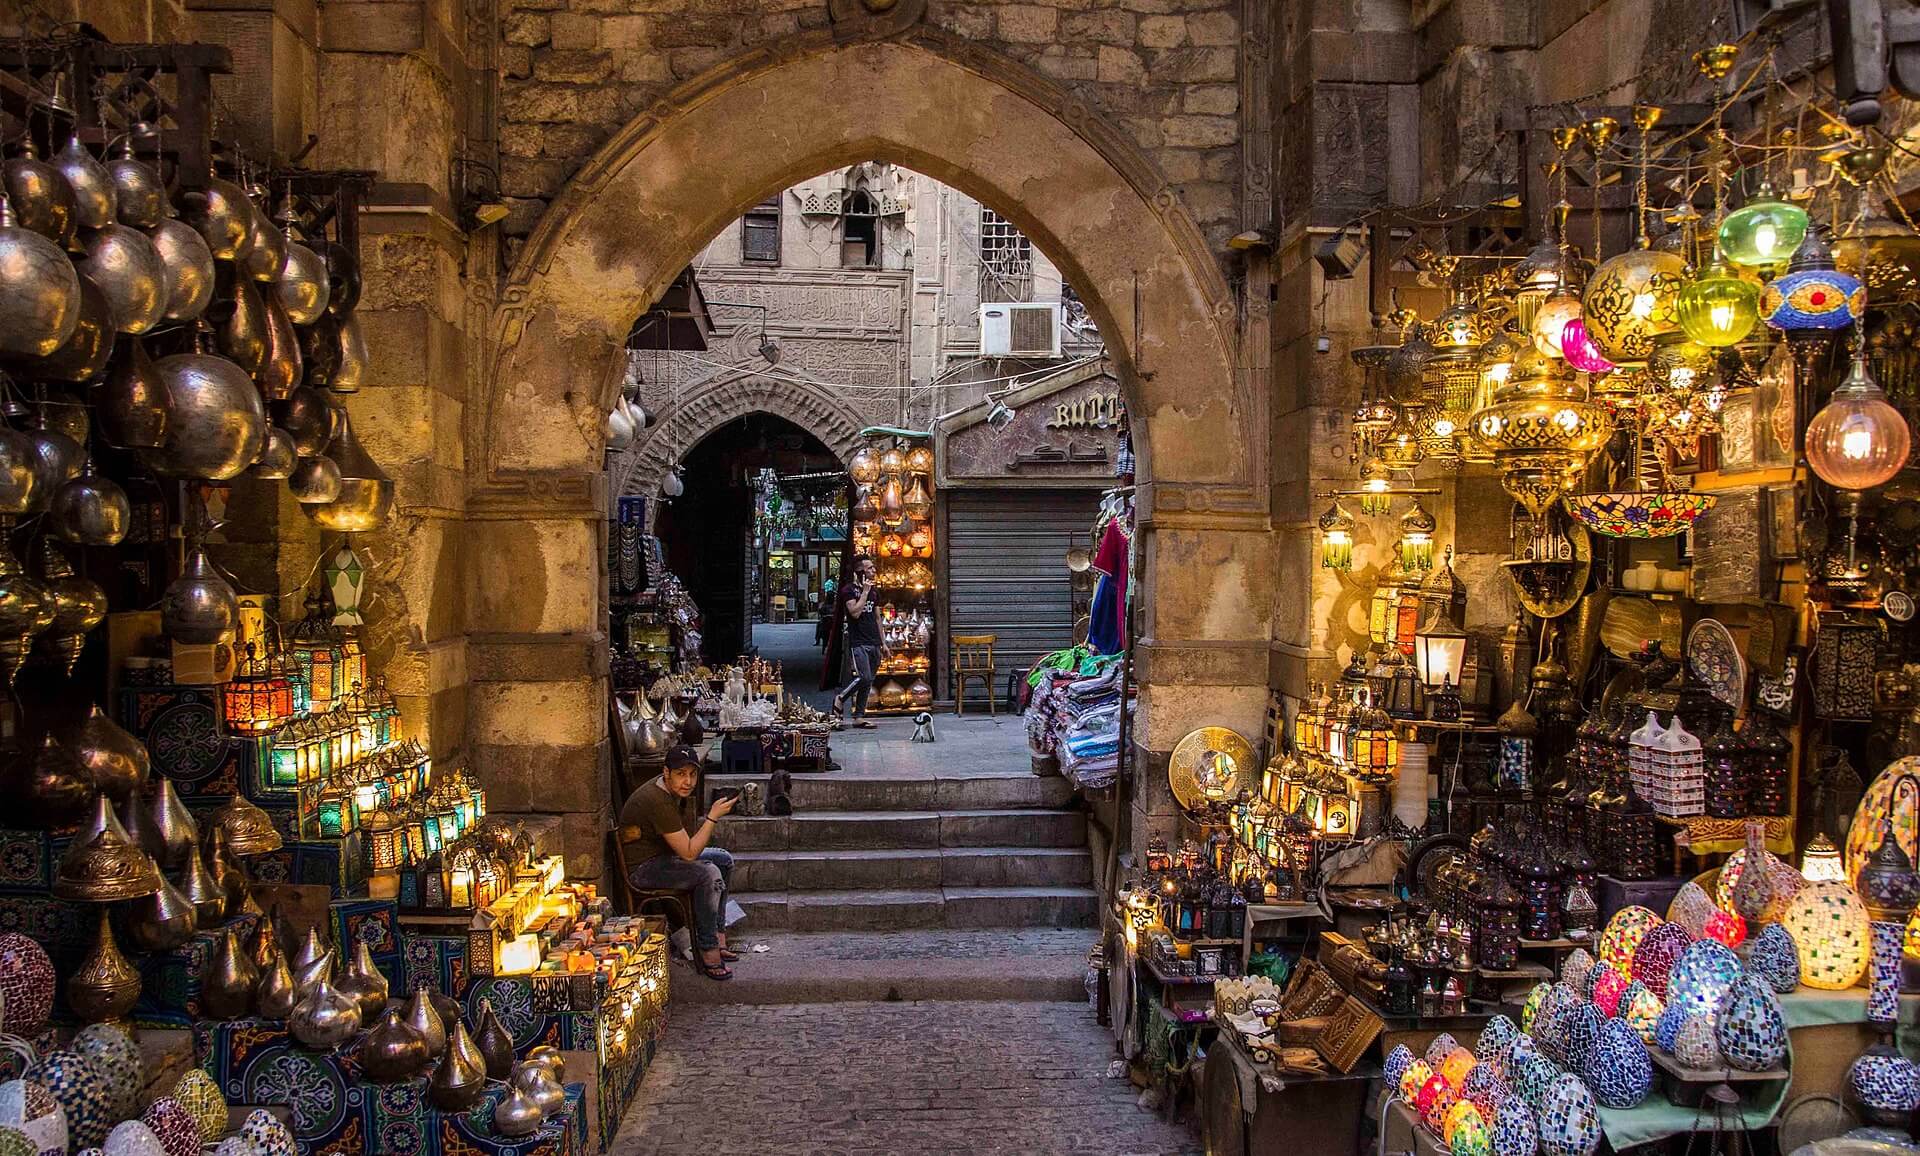 <p>Cairo’s central bazaar has long been a place of economic and cultural significance. Established in the 14th century, it’s ideal for buying authentic jewelry, souvenirs, or clothes from local merchants and salesmen. You must include it in your tour of <a href="https://wealthofgeeks.com/things-to-do-in-cairo-egypt/">Cairo</a>, as the Al Hussein mosque and Al-Azhar University are nearby.</p>